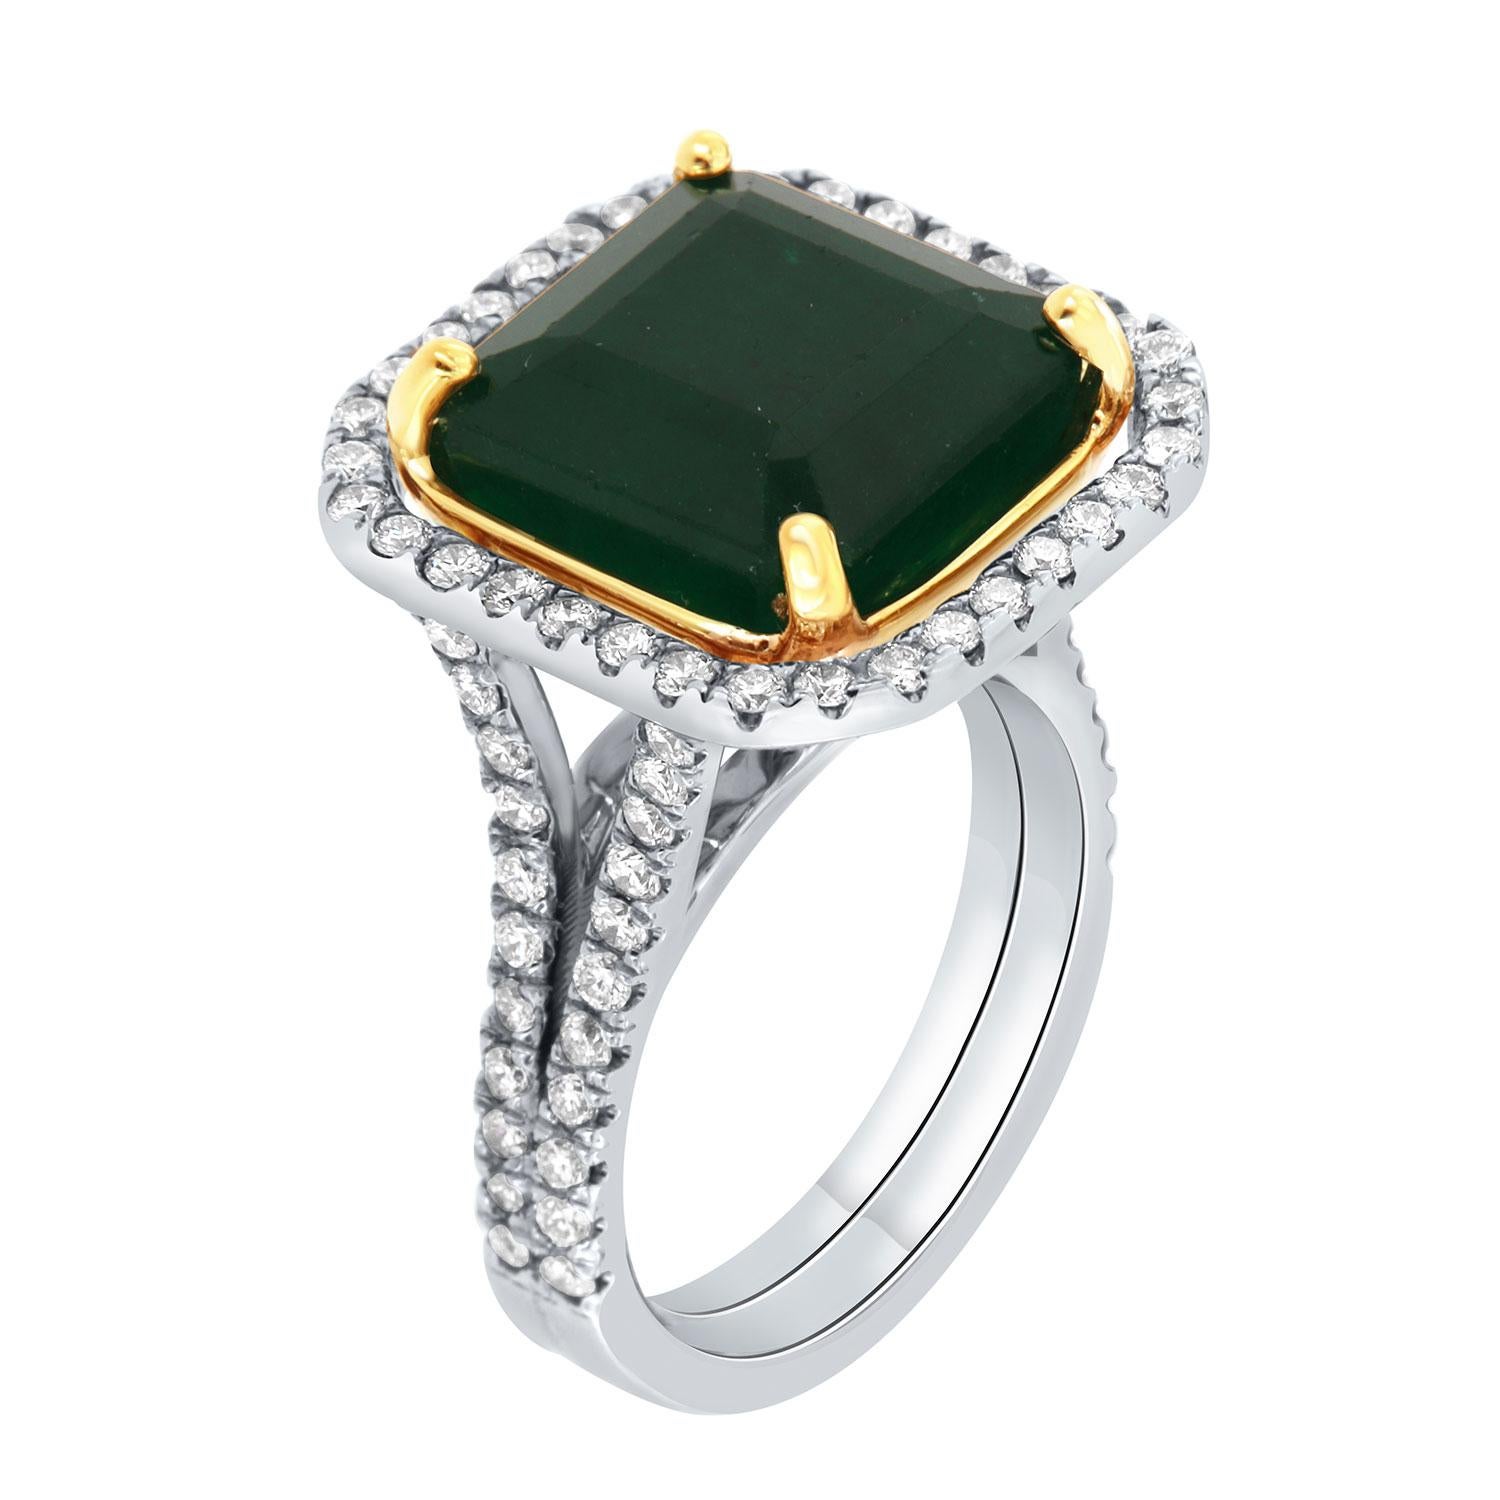 This 18K White and Yellow gold ring feature a 9.61 - Carat Ascher cut Natural Green emerald from Zambia. Excellent deep green color. The emerald is encircled by a halo of brilliant round diamonds on a 4mm wide split shank band. The diamonds are